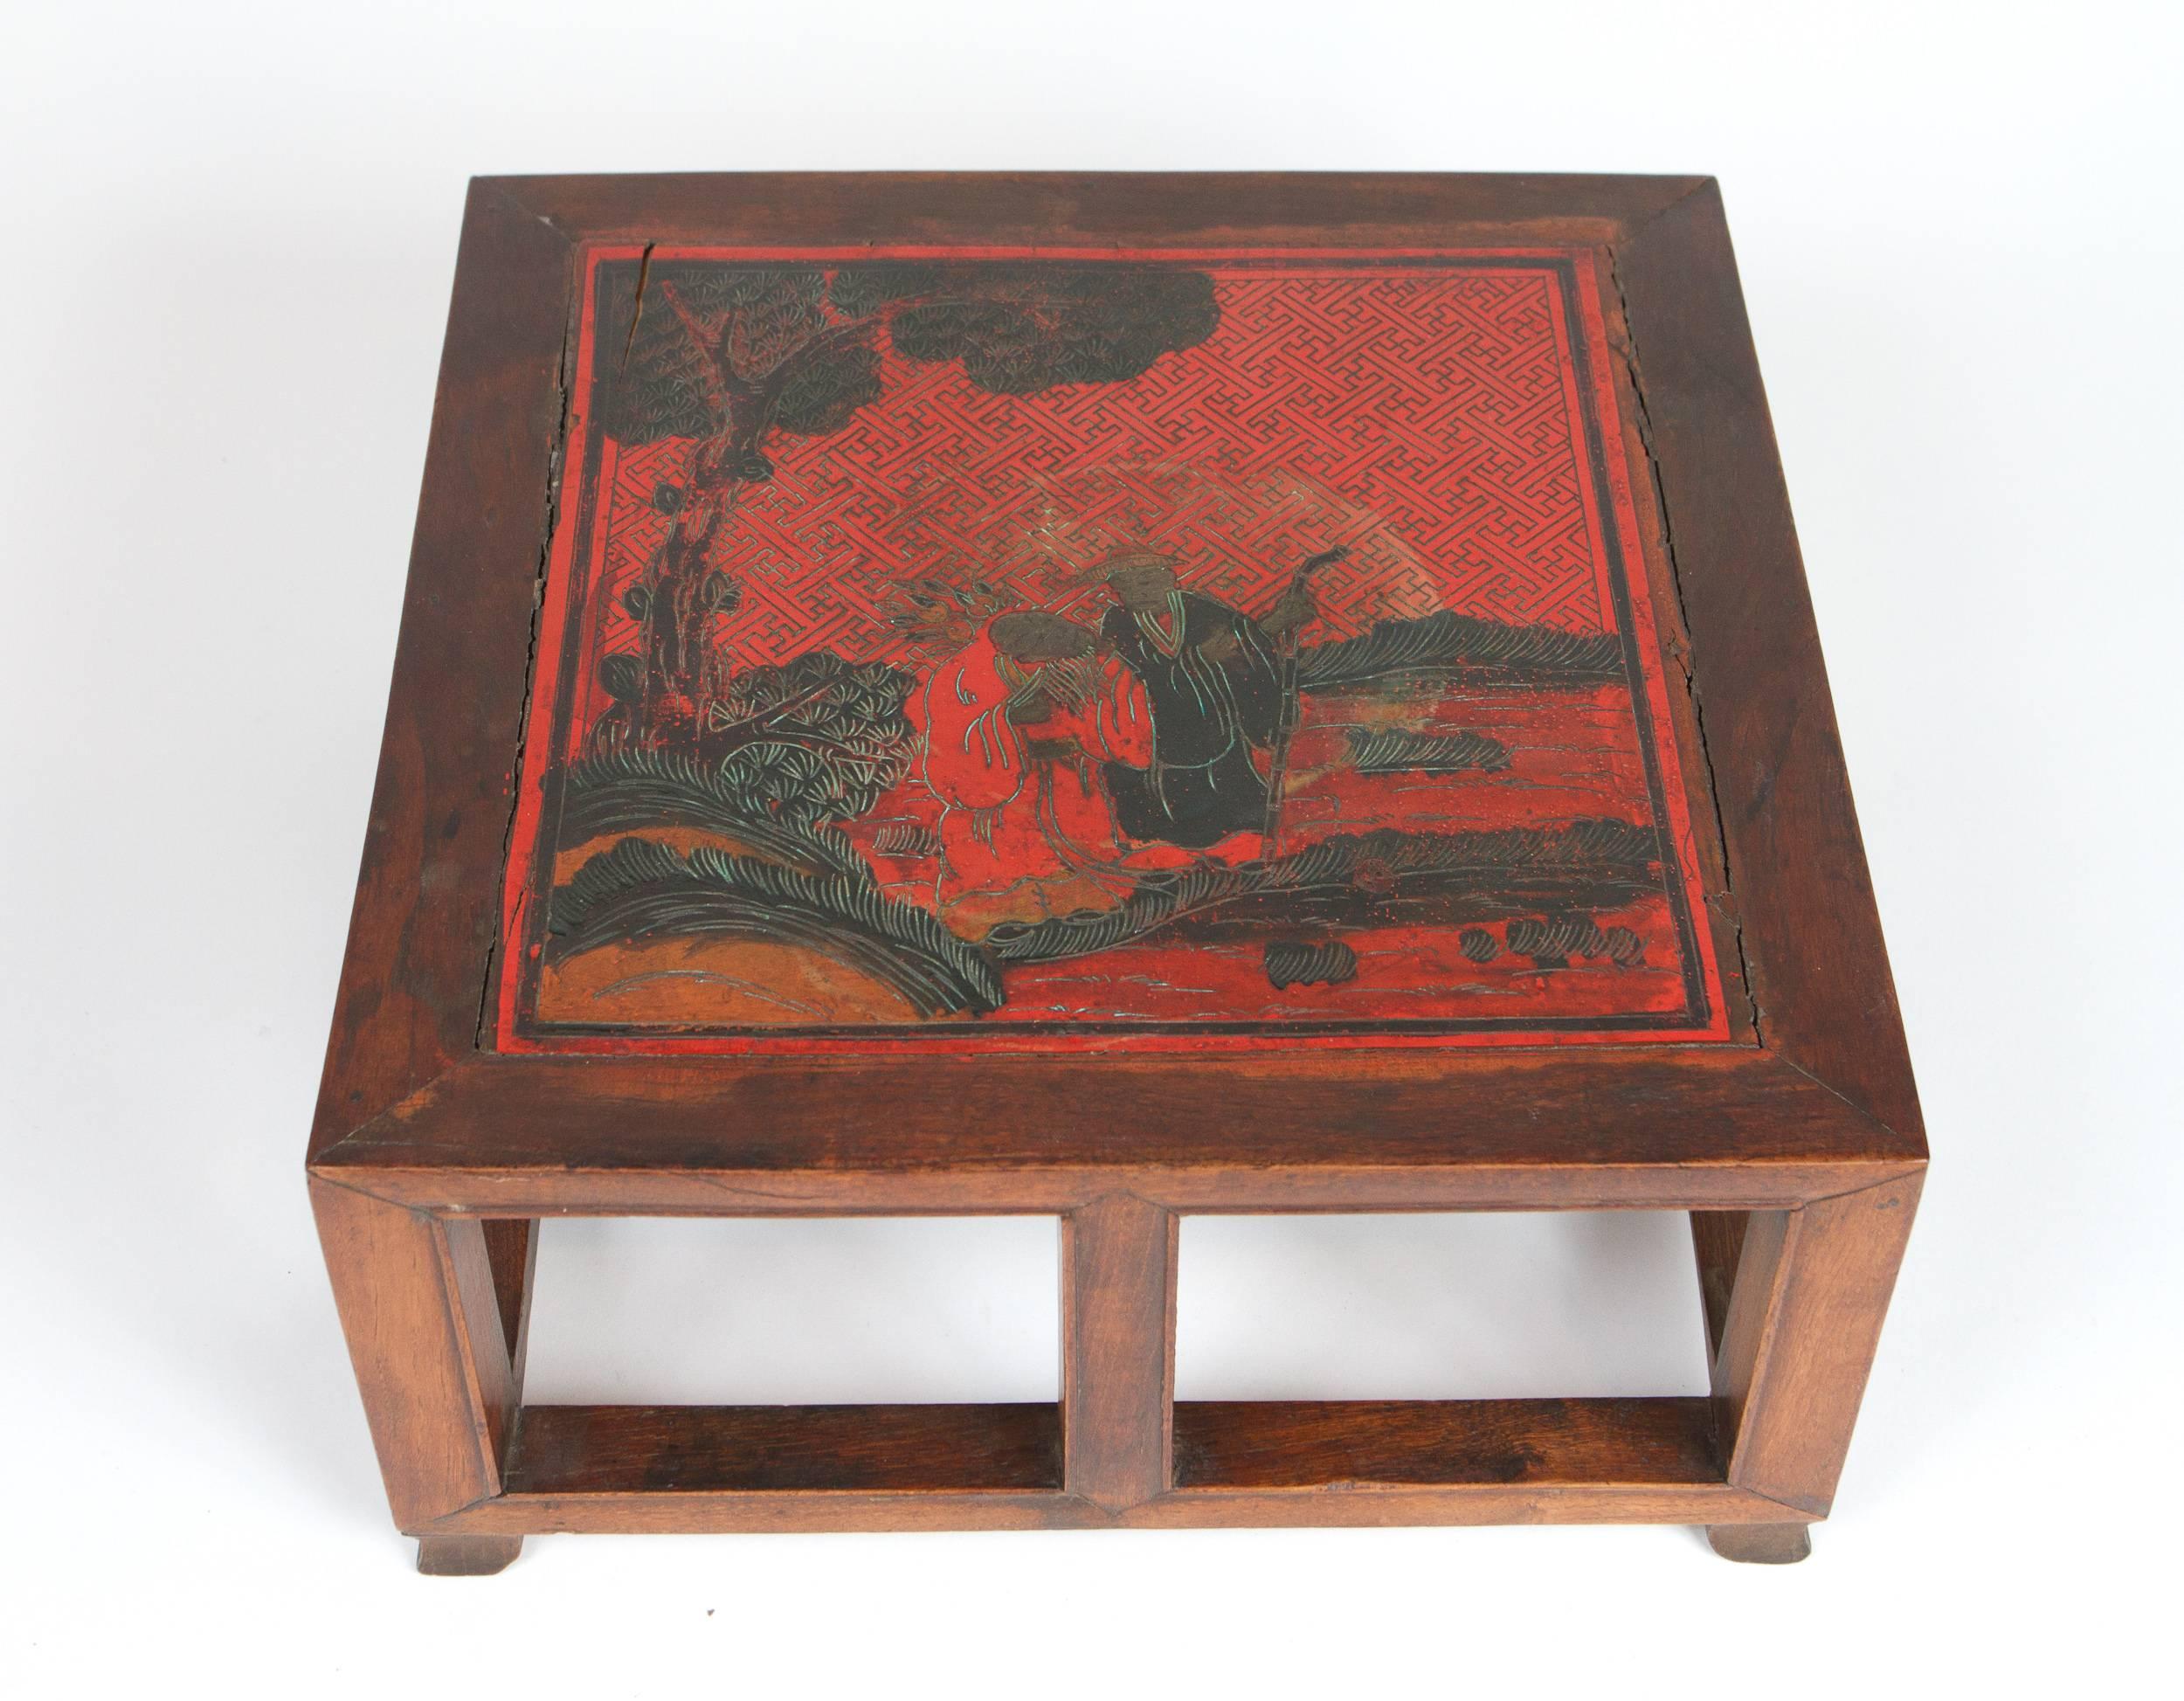 Qing Dynasty Chinese export red lacquered hand painted tray depicting two sages in a discussion. 
Bearing glued paper mark under the base.